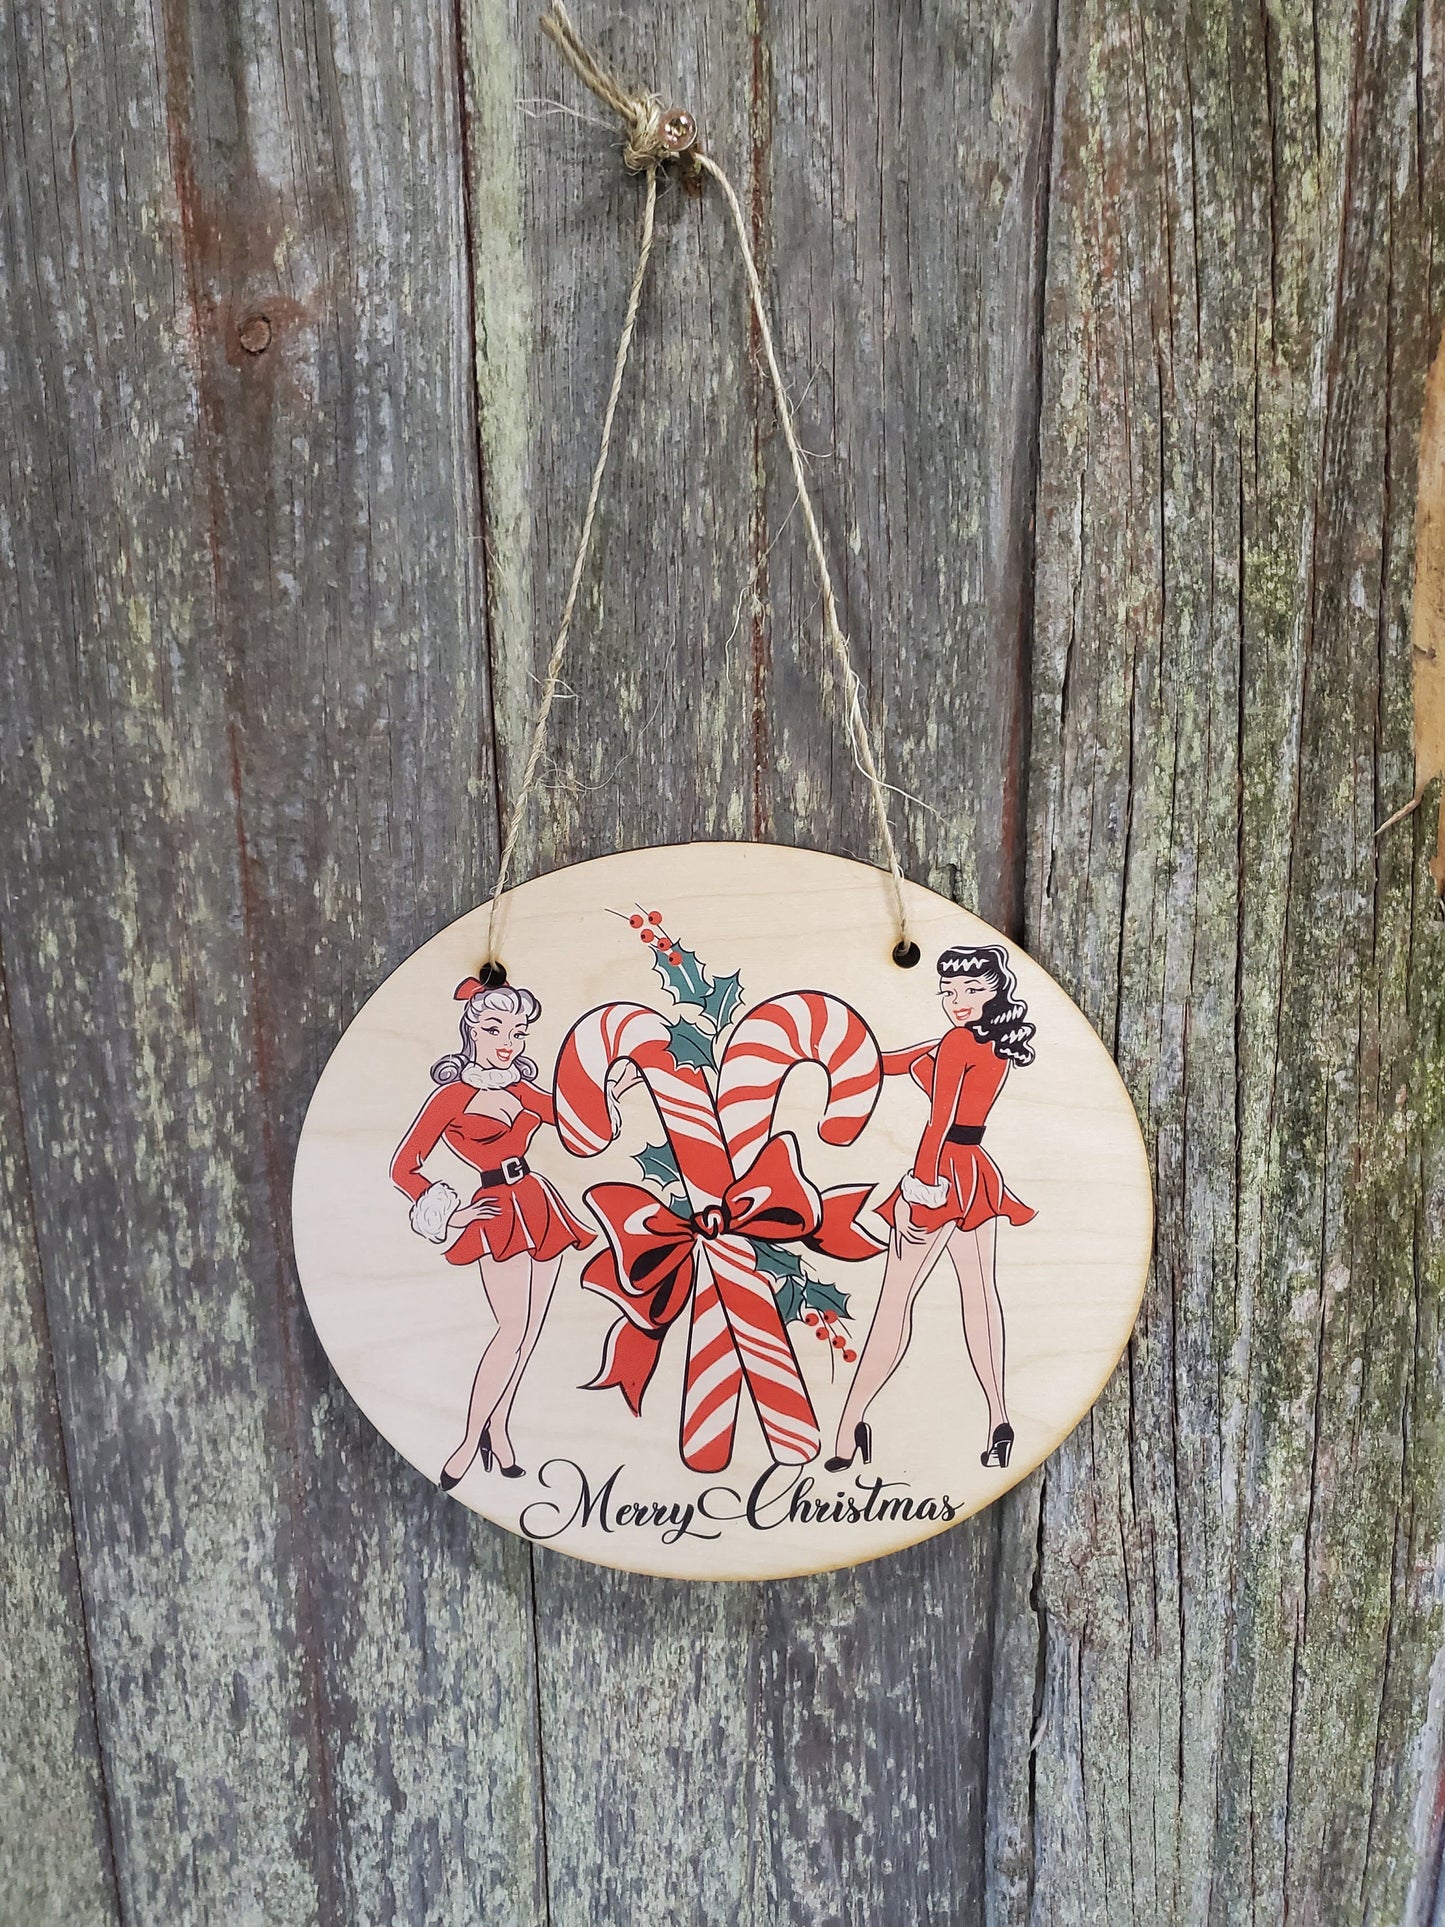 Vintage Pin Up Girls Merry Christmas Retro Lady Wood Candy Canes Door Hanger Front Door Entry Way Decor Plaque Wood Print